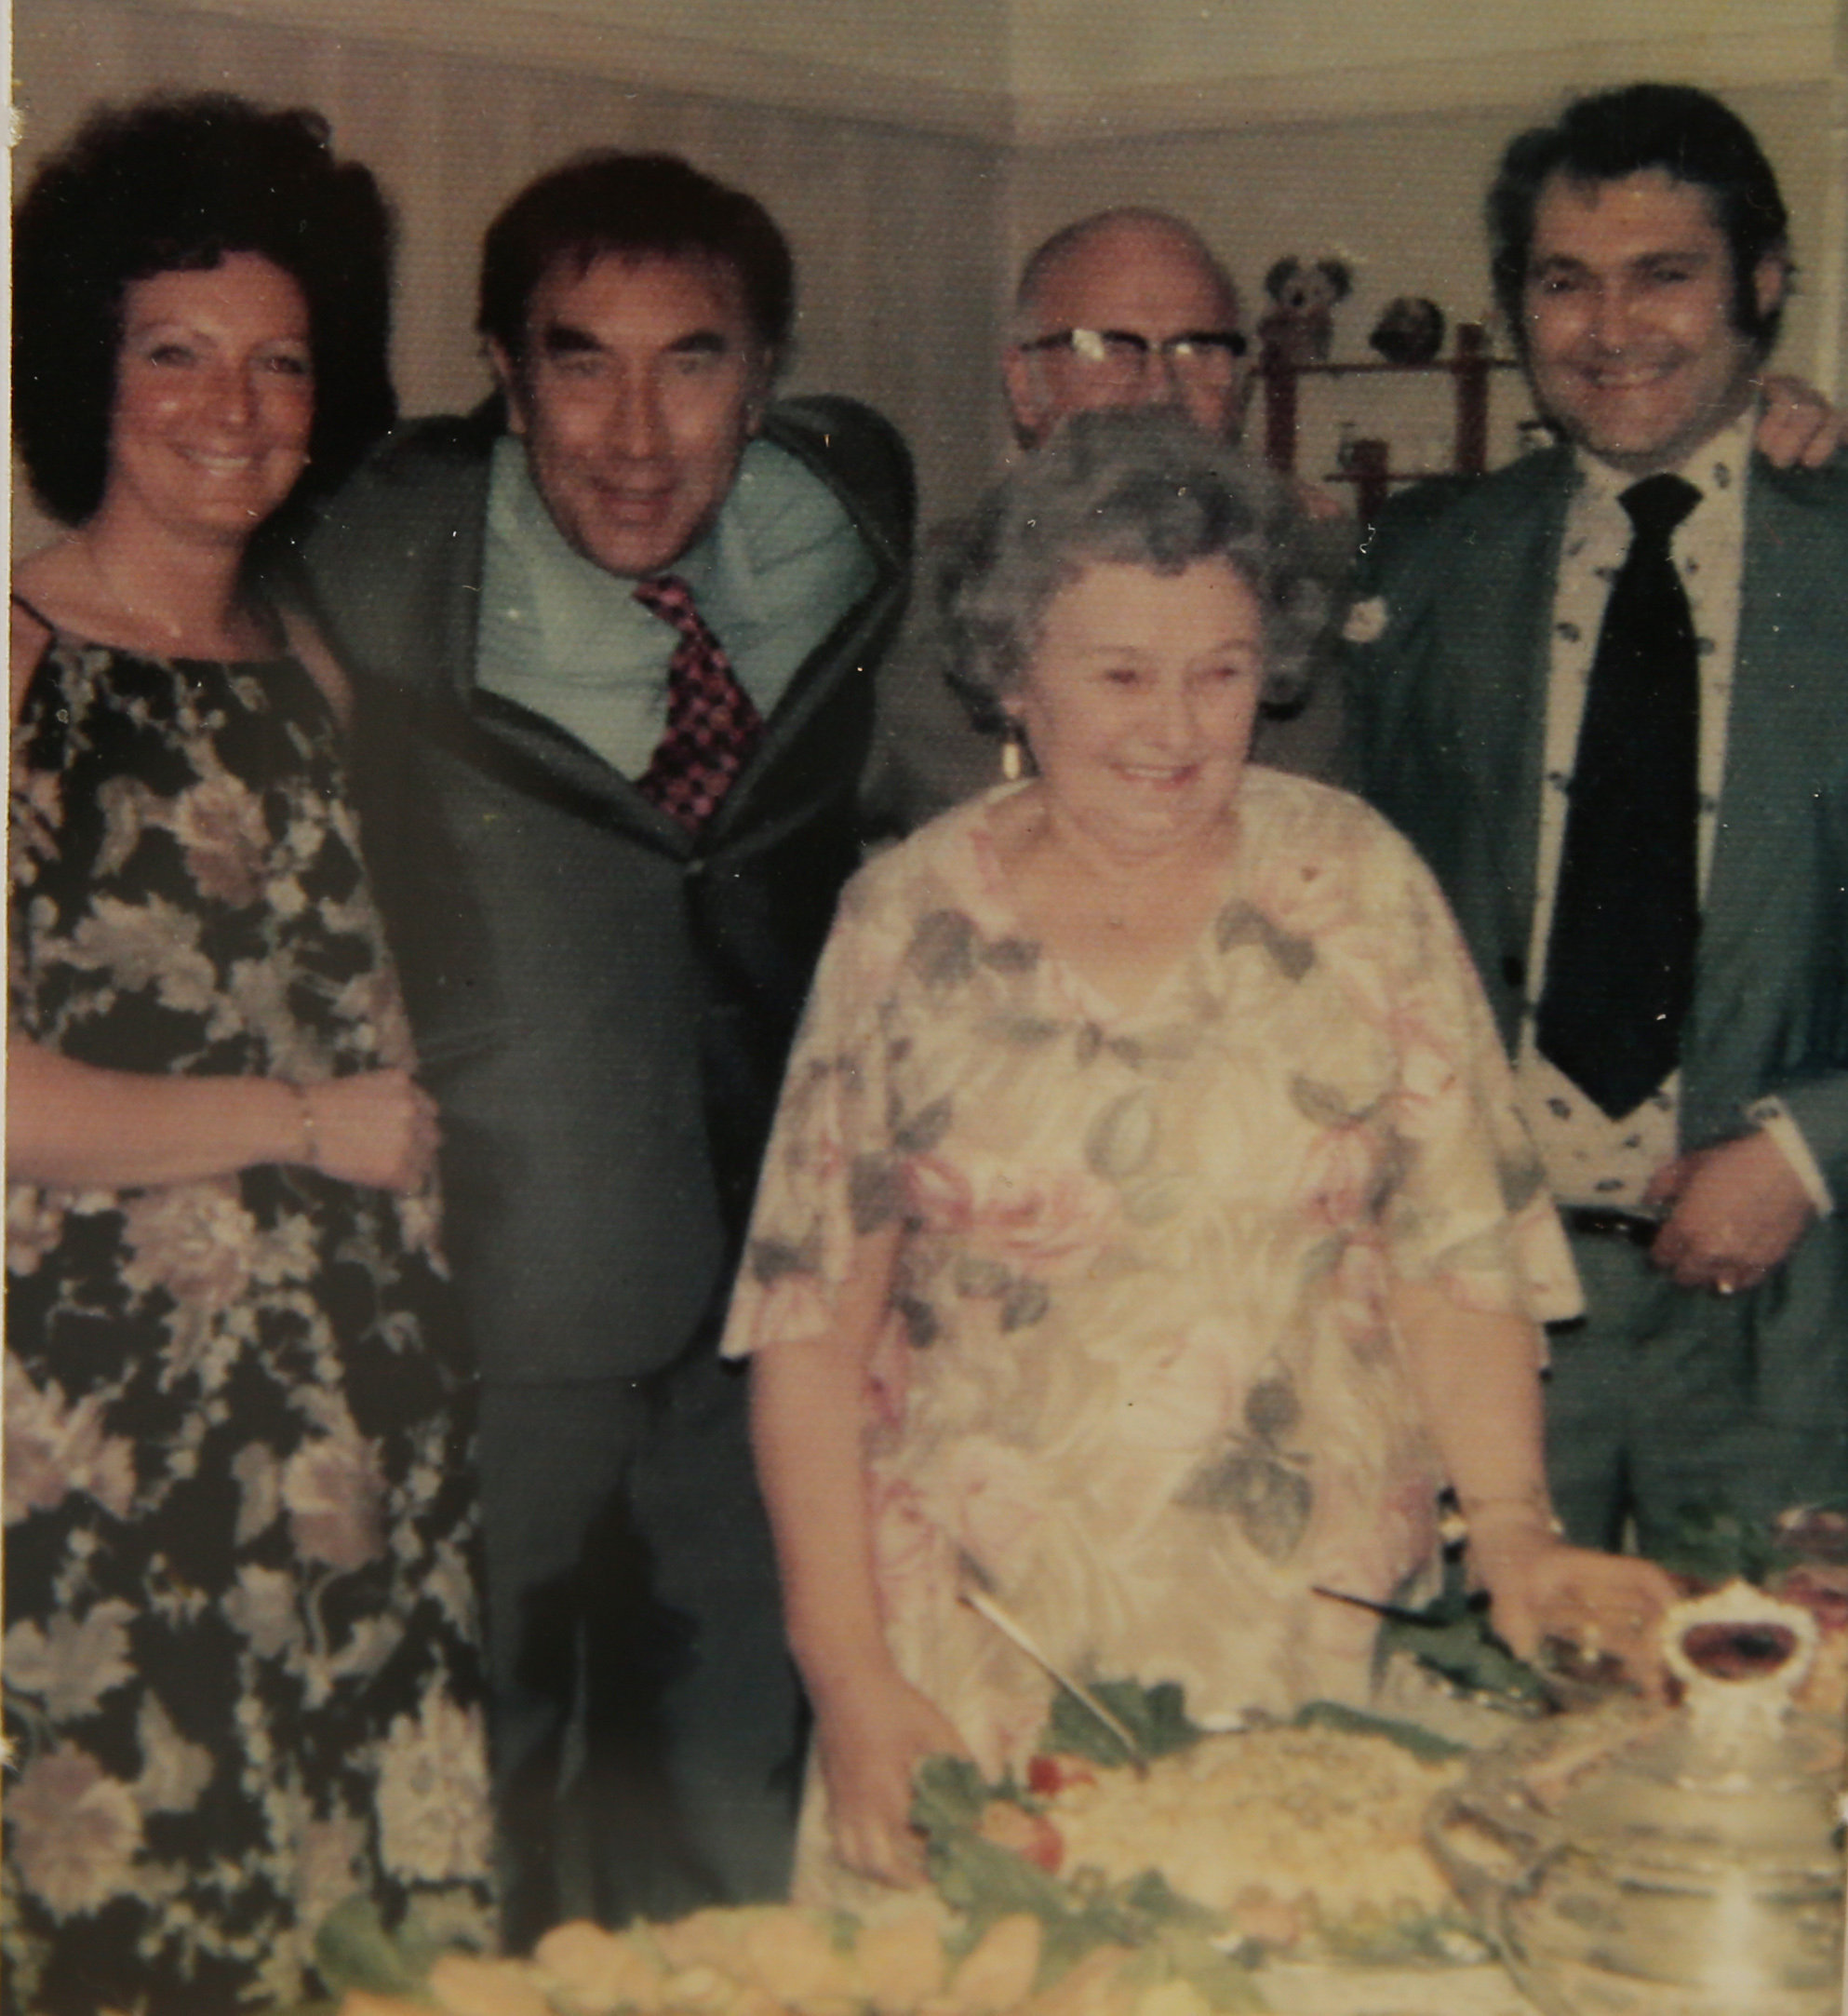 Margot Burkhill, left pictured with Frankie Howerd (2nd from left) in Glasgow. At right is her husband Ian. The couple in the middle are a Mr and Mrs Young. Frankie was a family friend of the Youngs. Re Times Past feature... Photograph courtesy of Margot